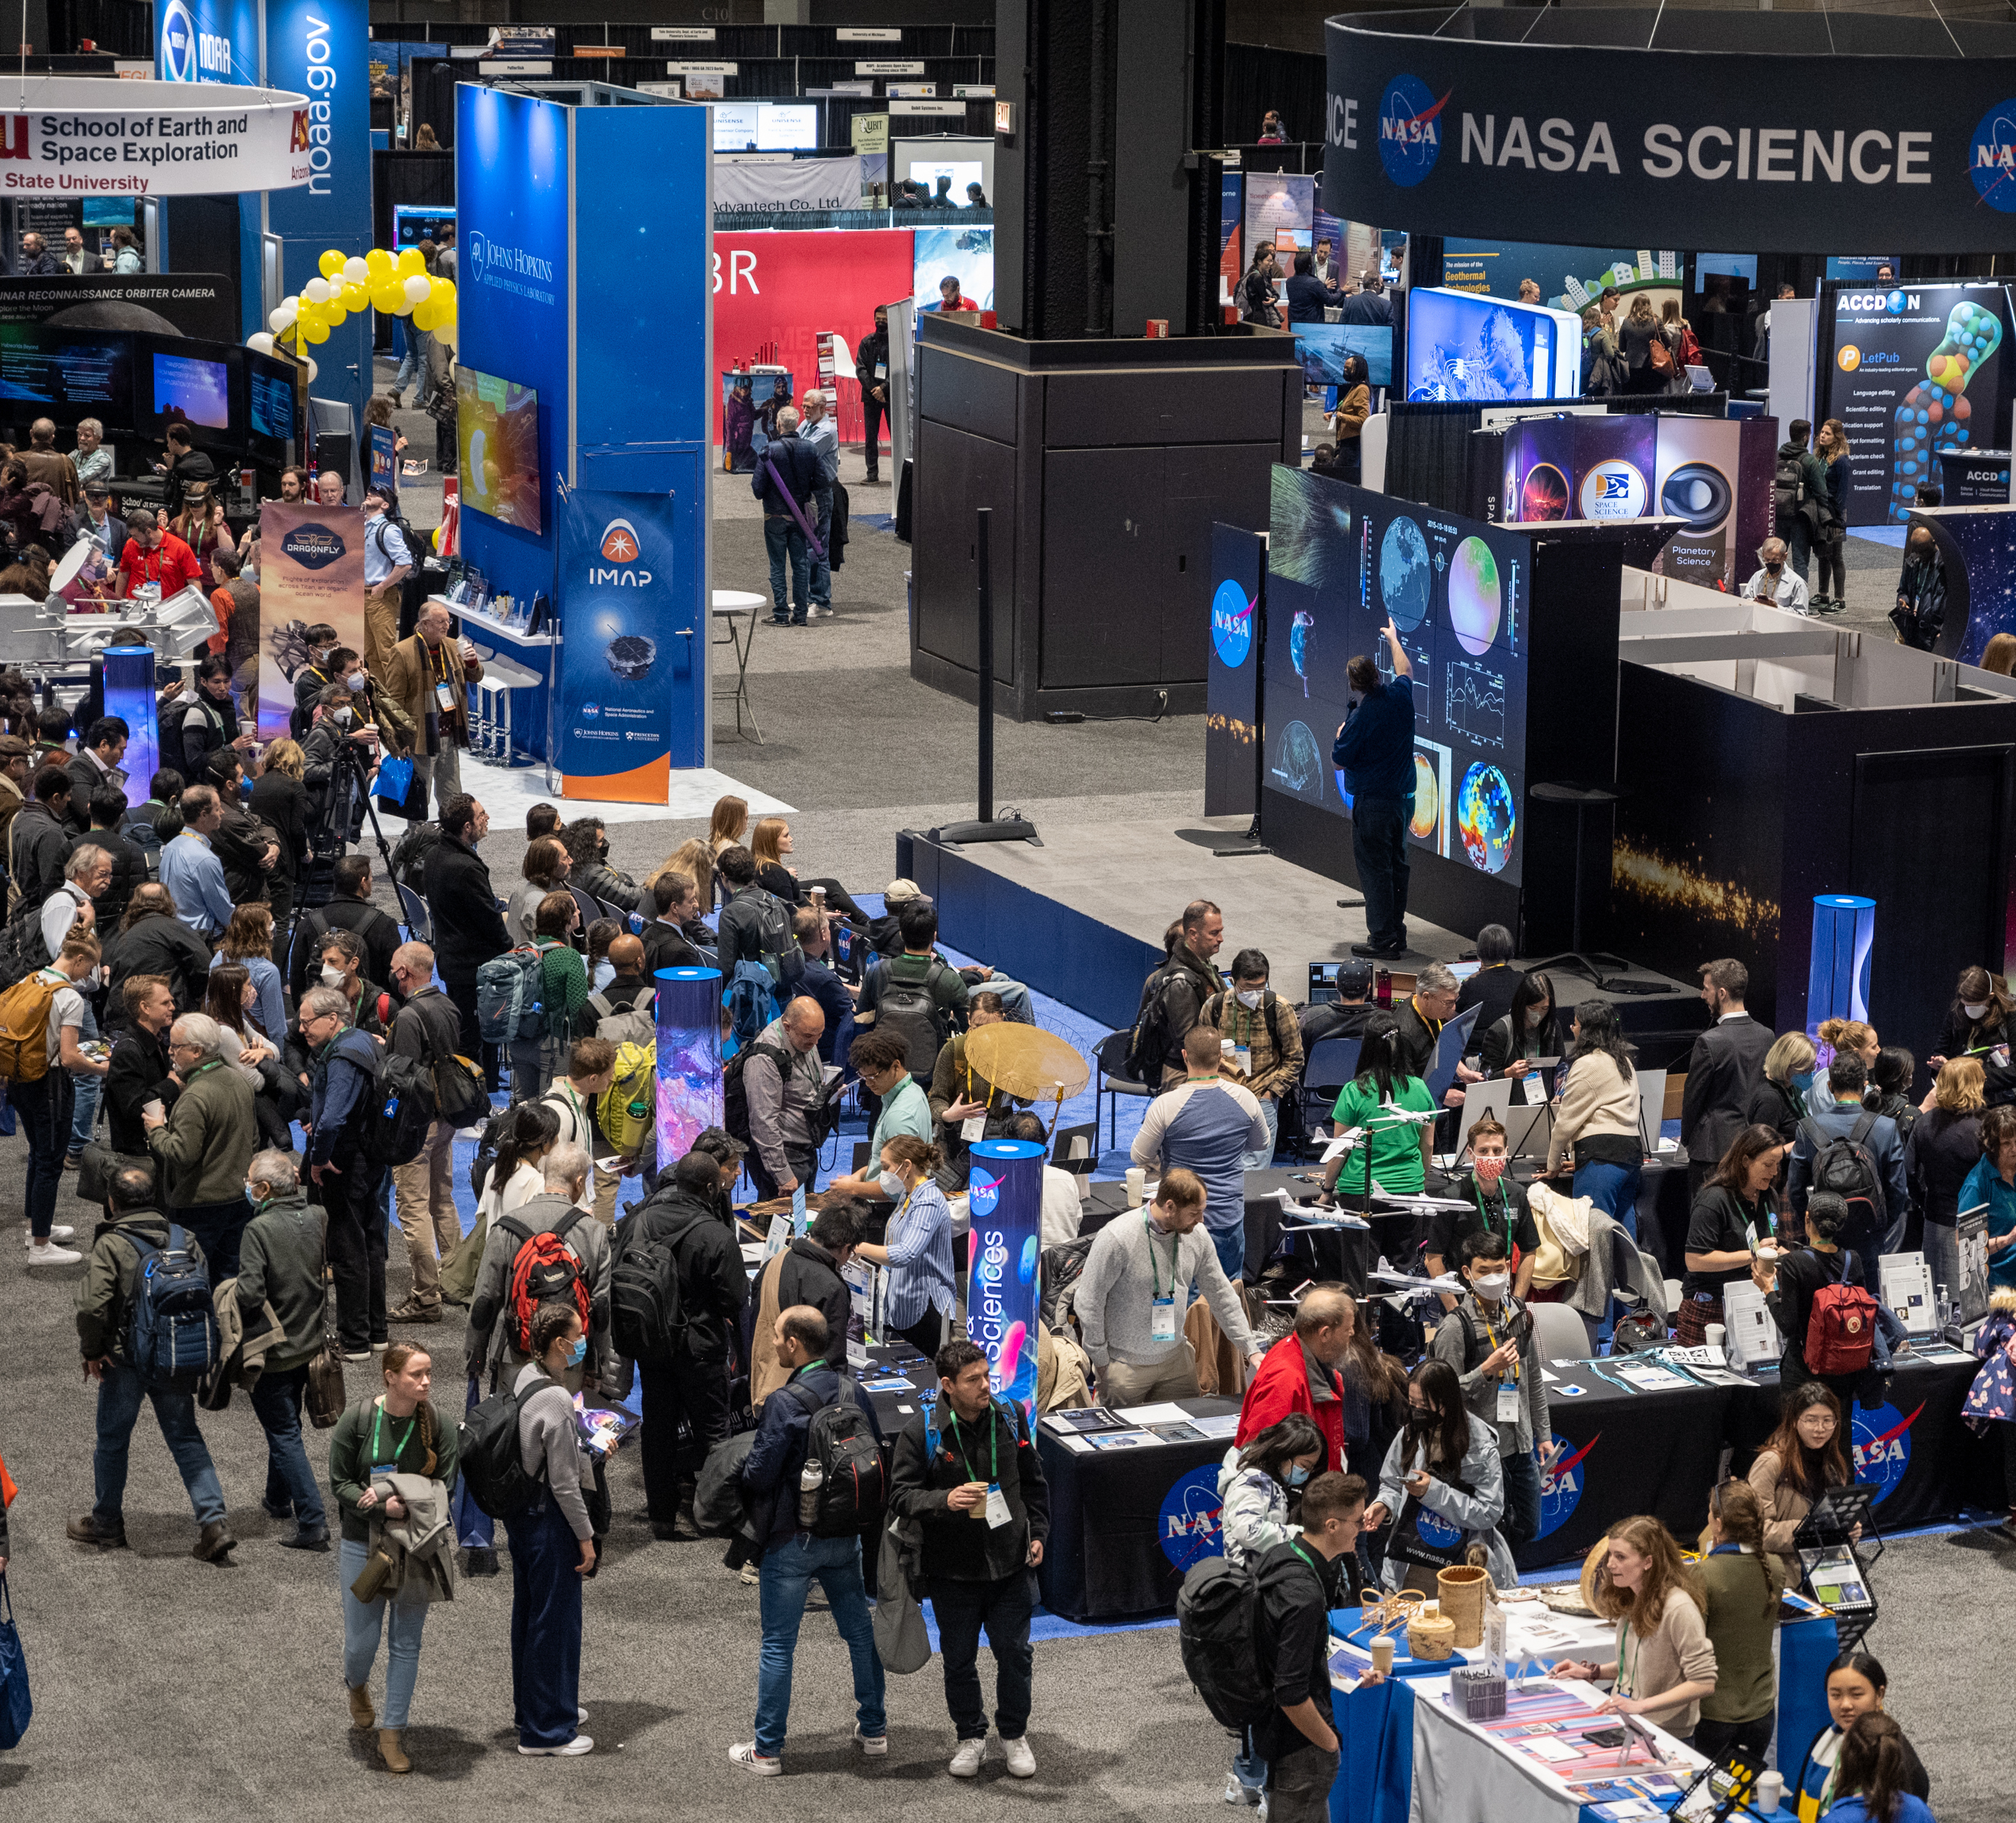 A large group of people crowd around multiple staffed display tables in a large, open room. Behind the tables is an audience sitting facing a set of display screens (the NASA hyperwall) while a presenter gives a talk. Above it all is a hanging sign that says “NASA Science.” Other booths are visible in the foreground and background.